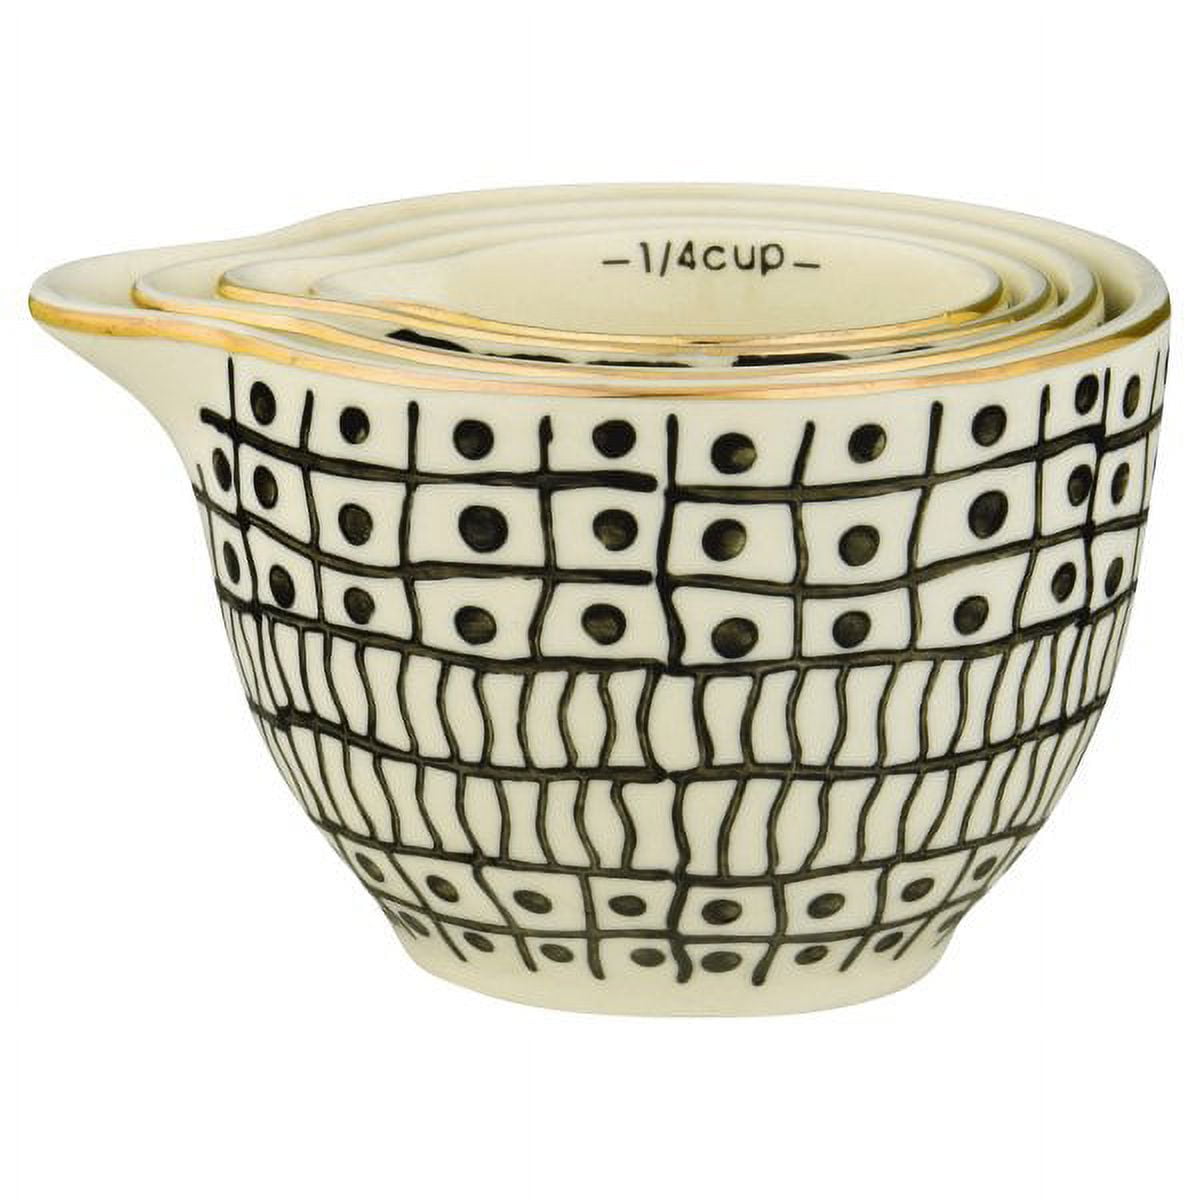 Black and White Stoneware Measuring Cups